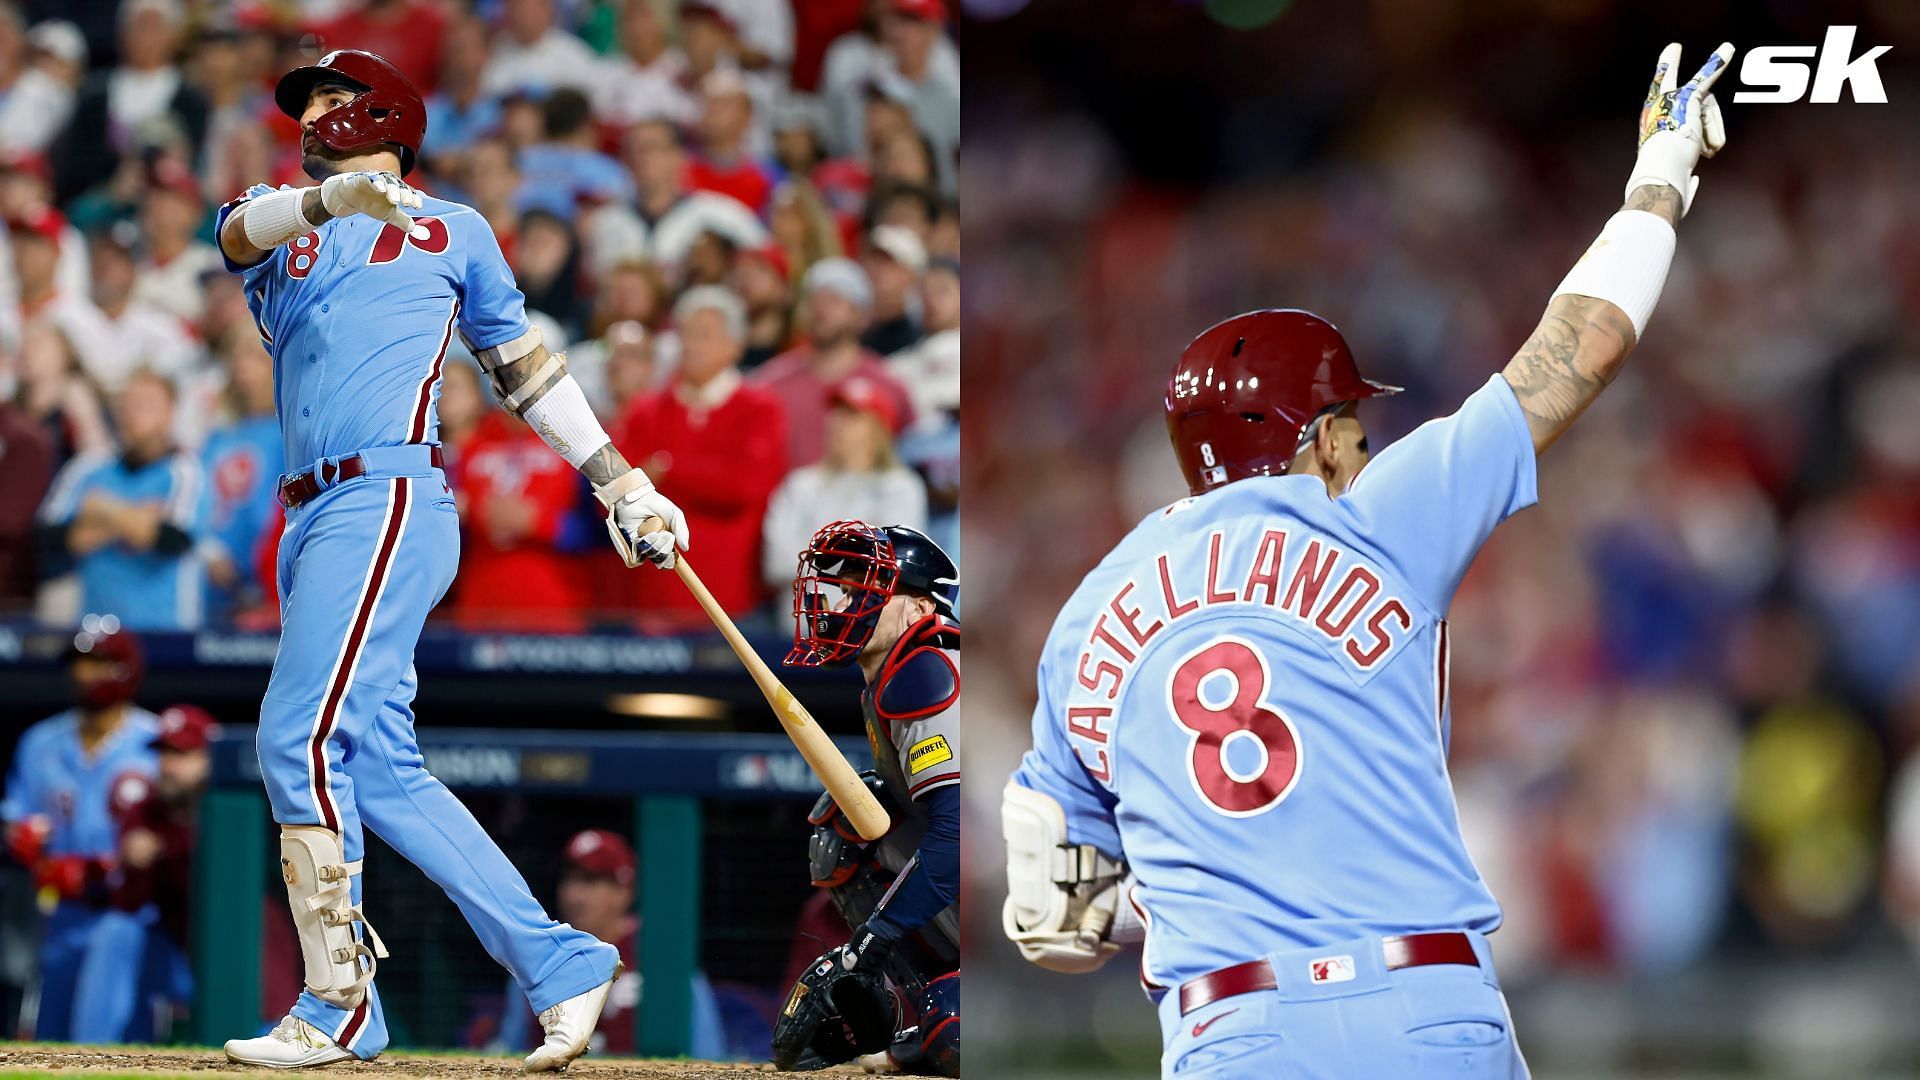 Phillies fans astonished as Nick Castellanos makes history against the Braves. 